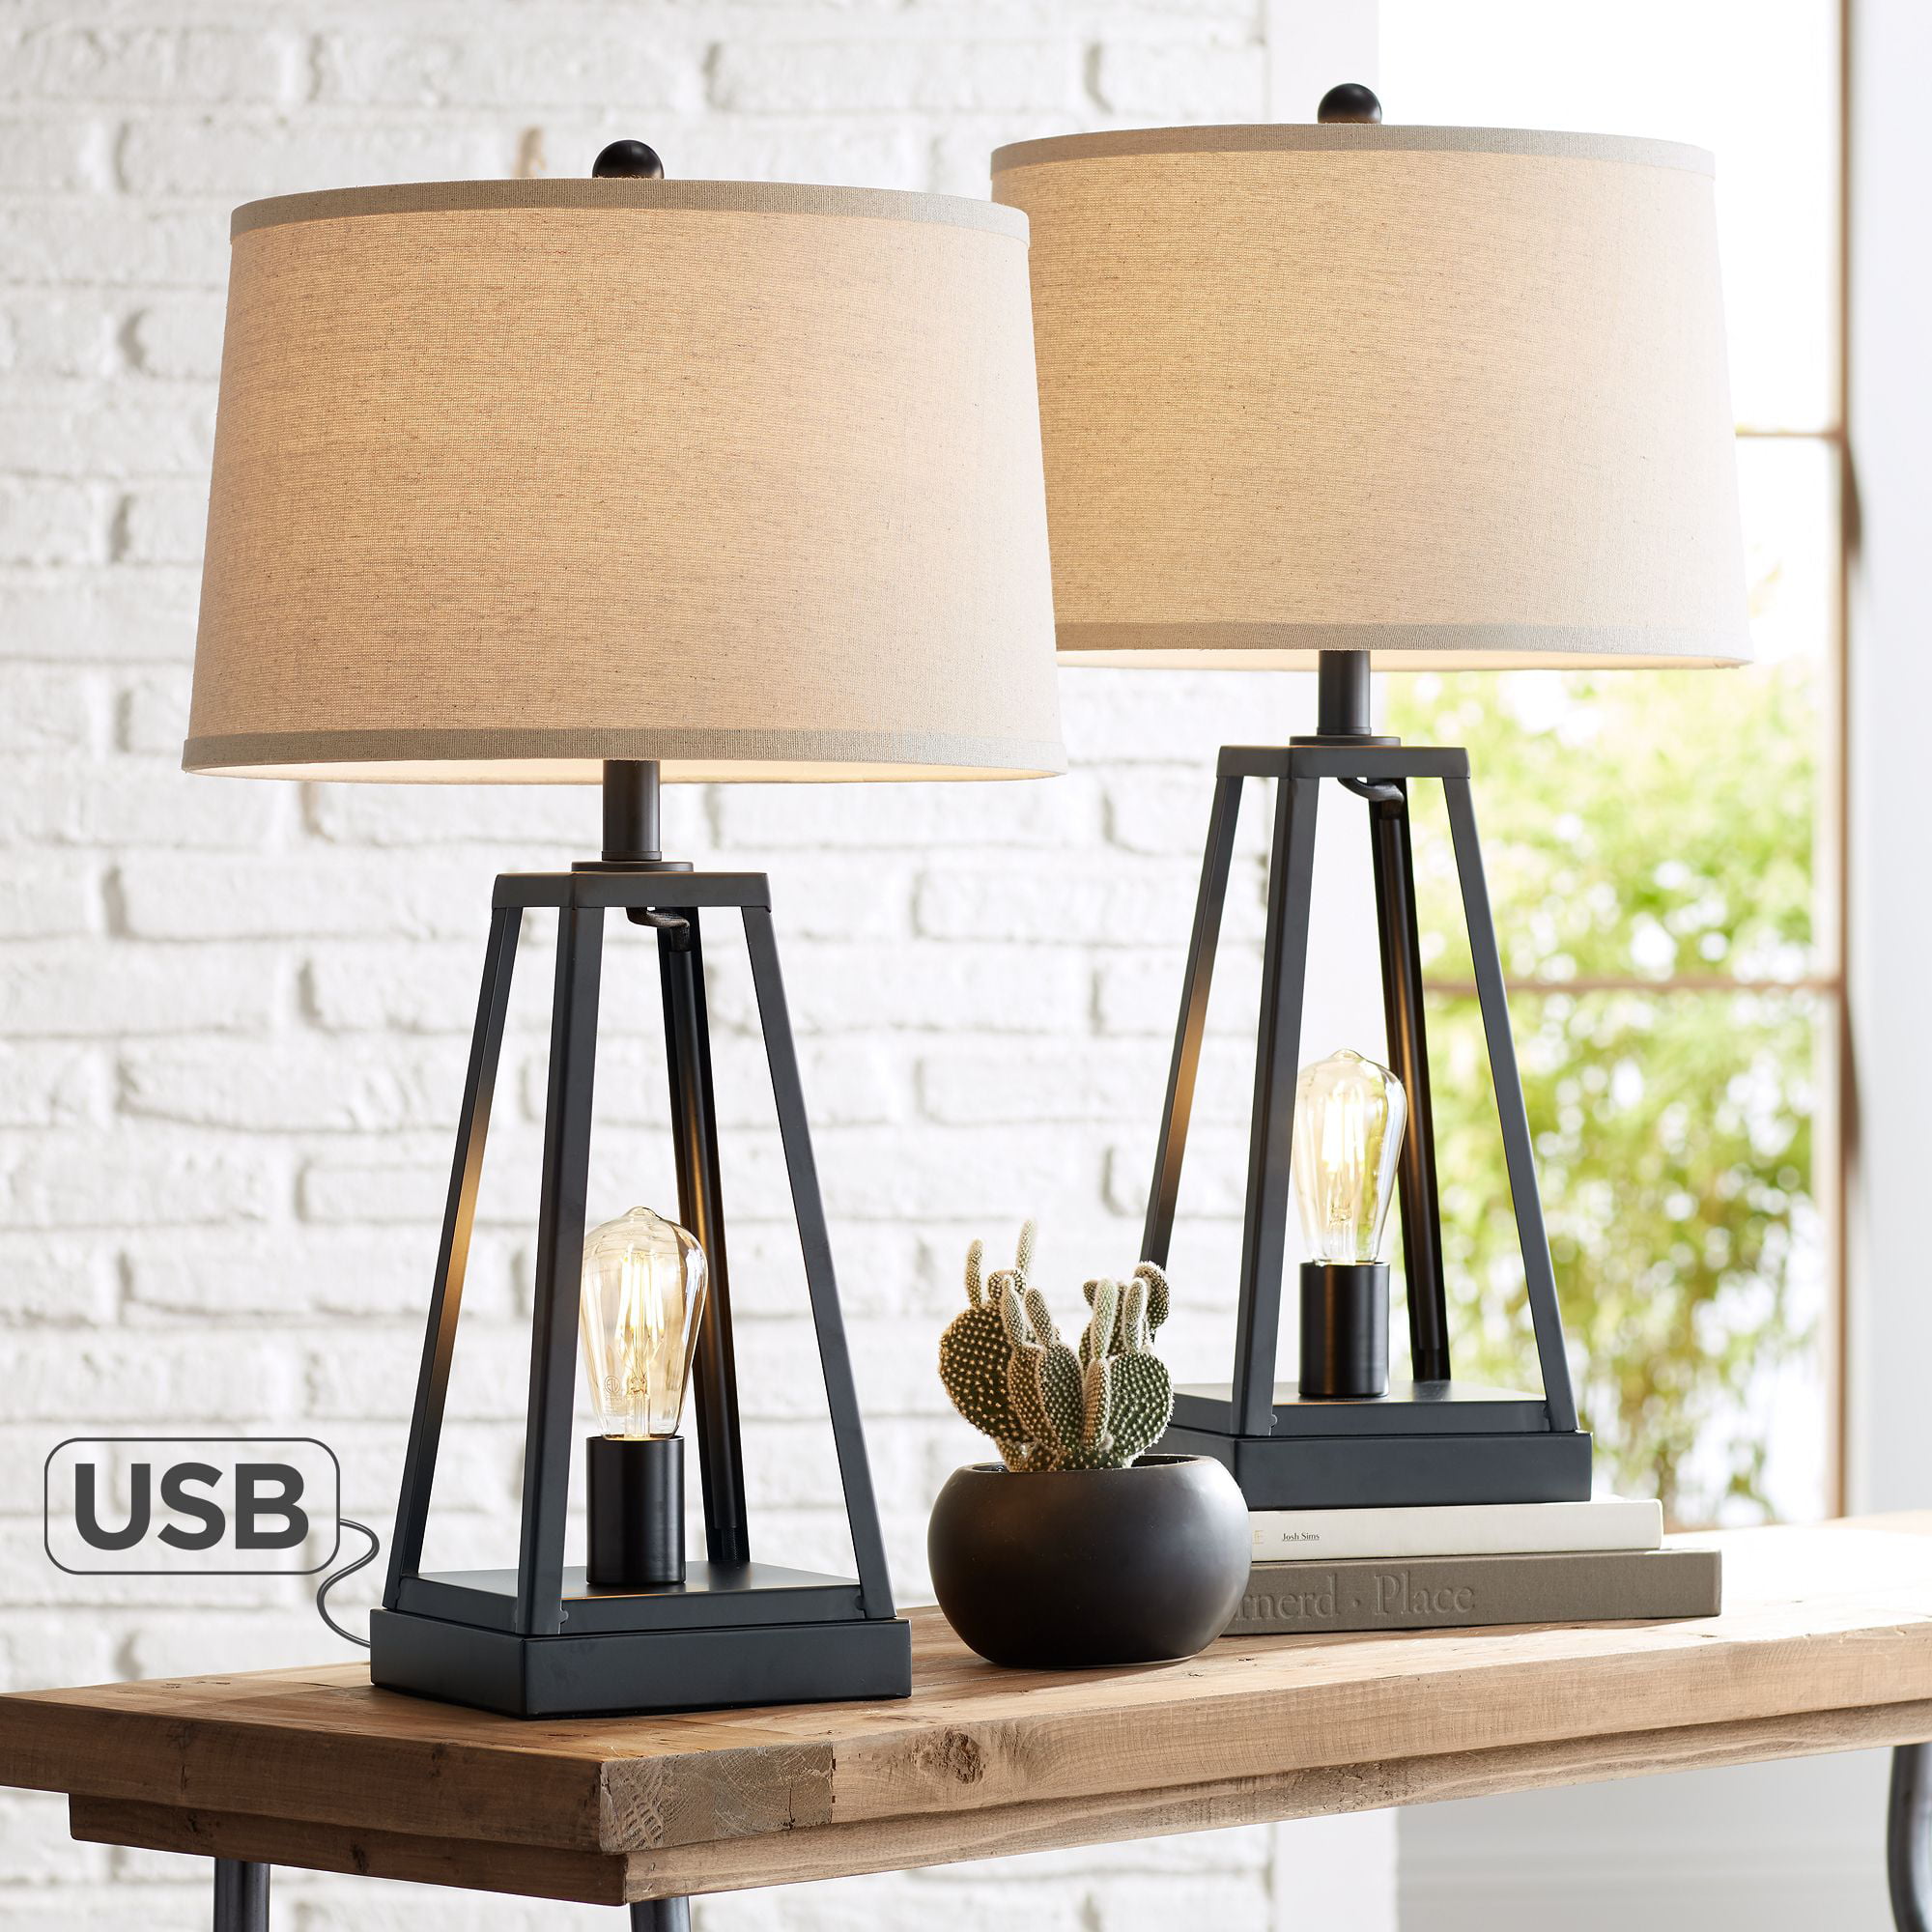 Franklin Iron Works Industrial Table Lamps Set of 2 with USB Port